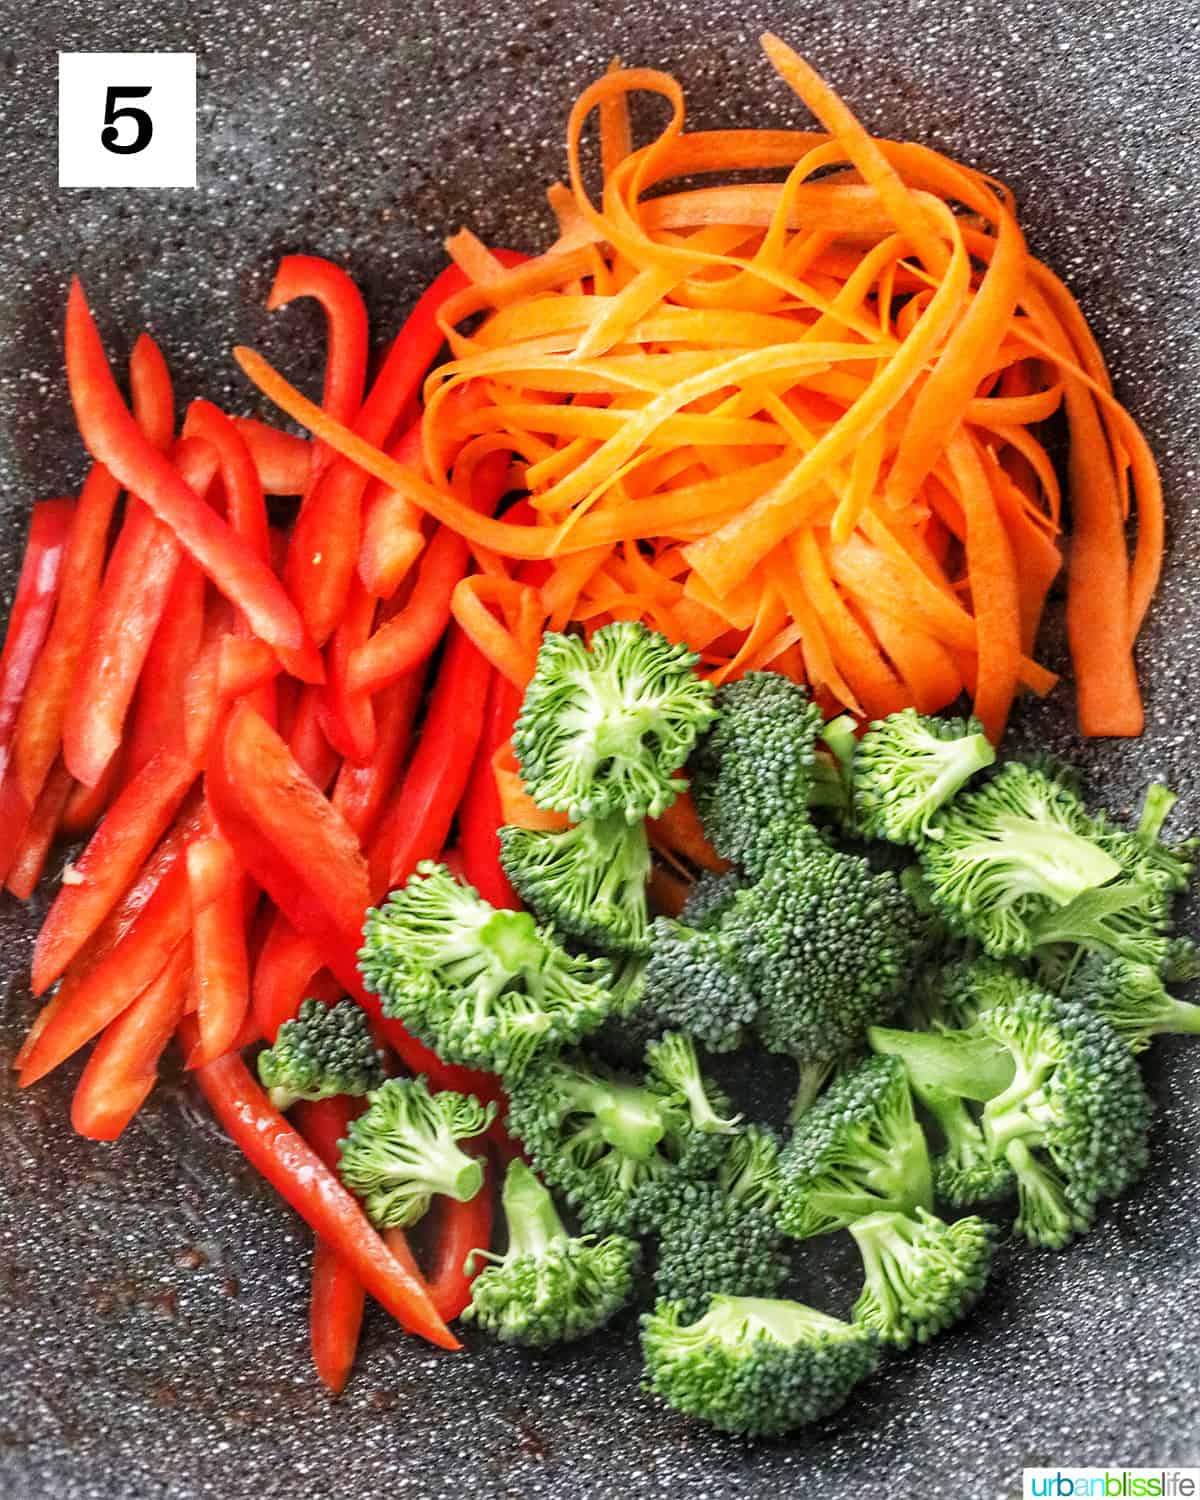 red bell peppers, carrots, and broccoli in a large wok.